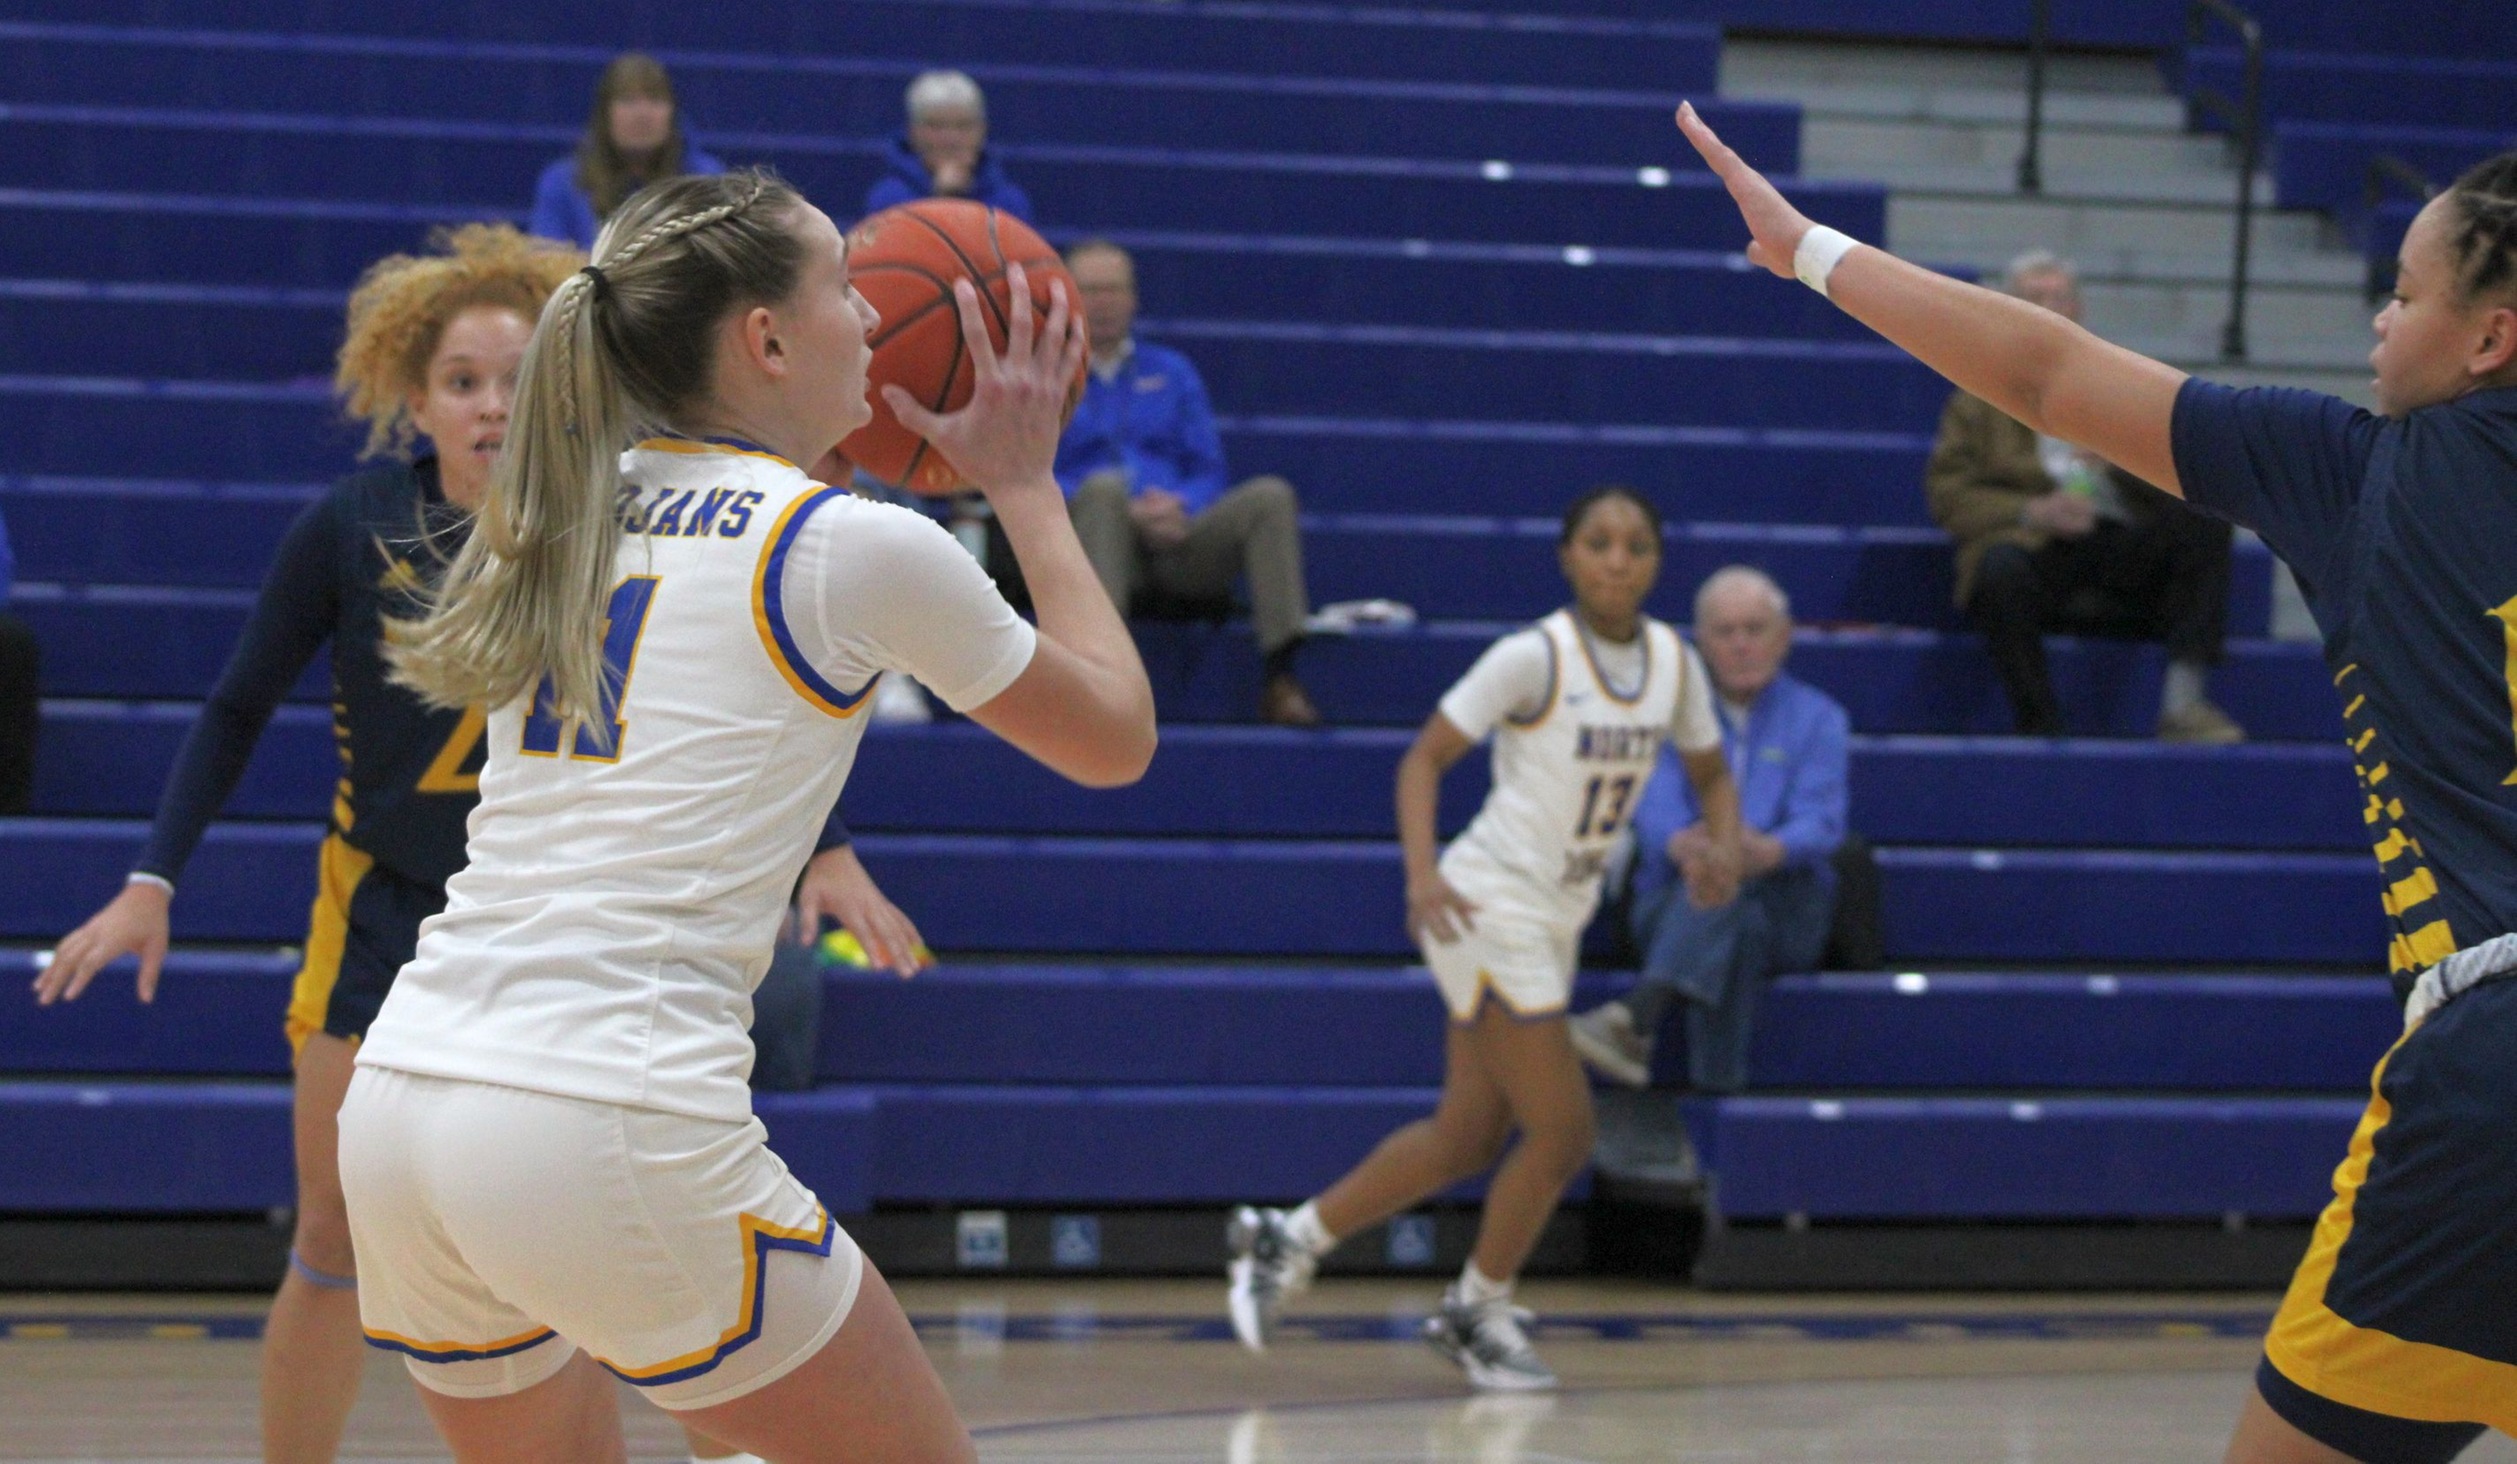 Balanced attack pushes NIACC past Ellsworth, 88-65